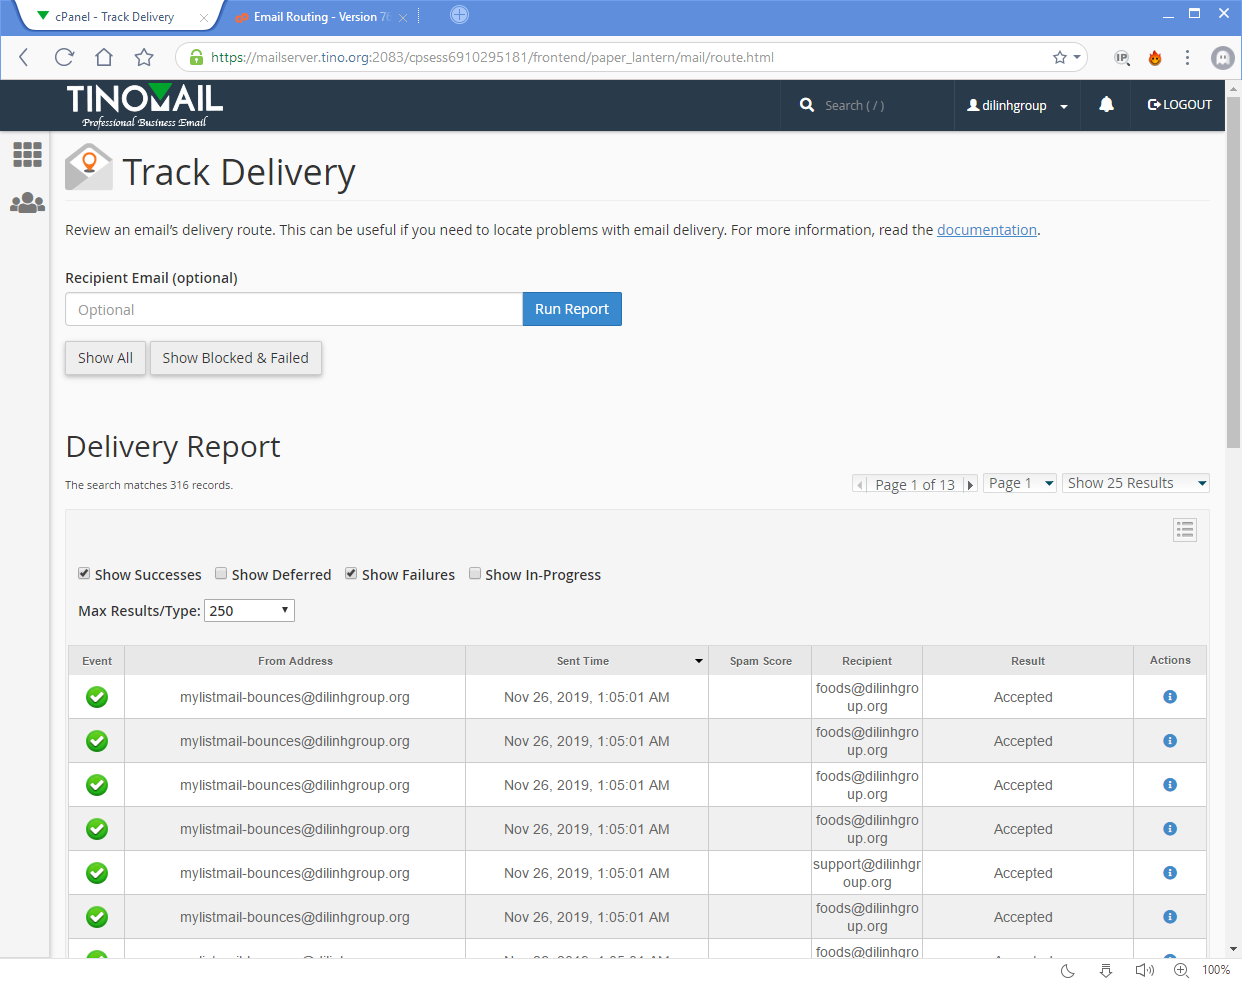 [cPanel] - Track Delivery 2